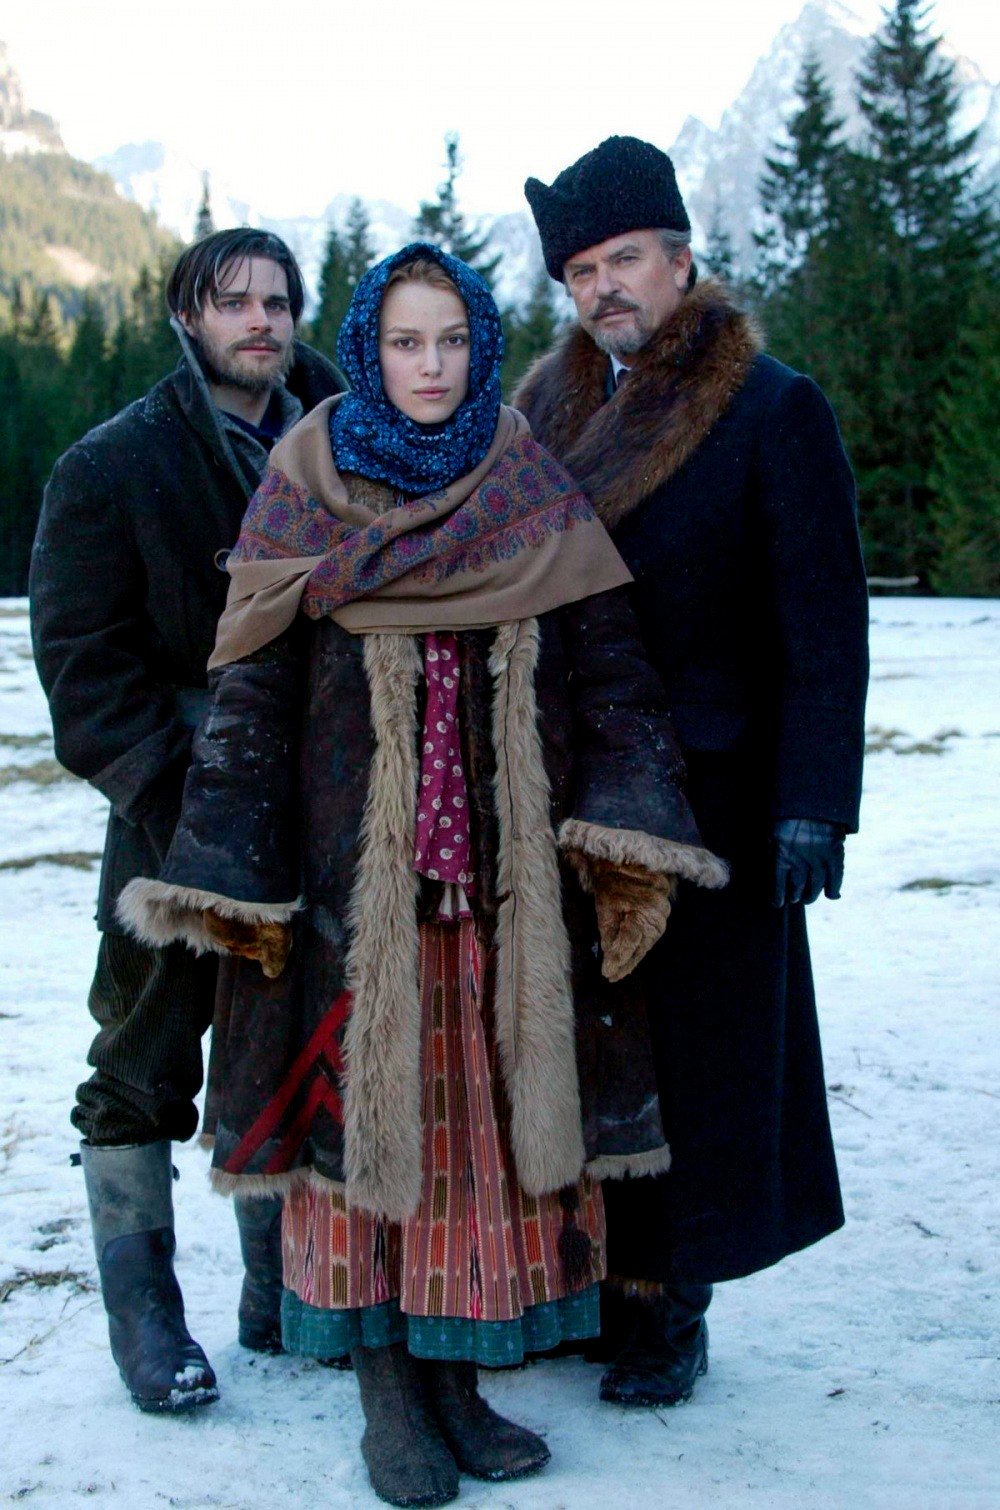 Hans Matheson (R) portrayed Zhivago in the 2002 mini-series by Giacomo Campiotti.